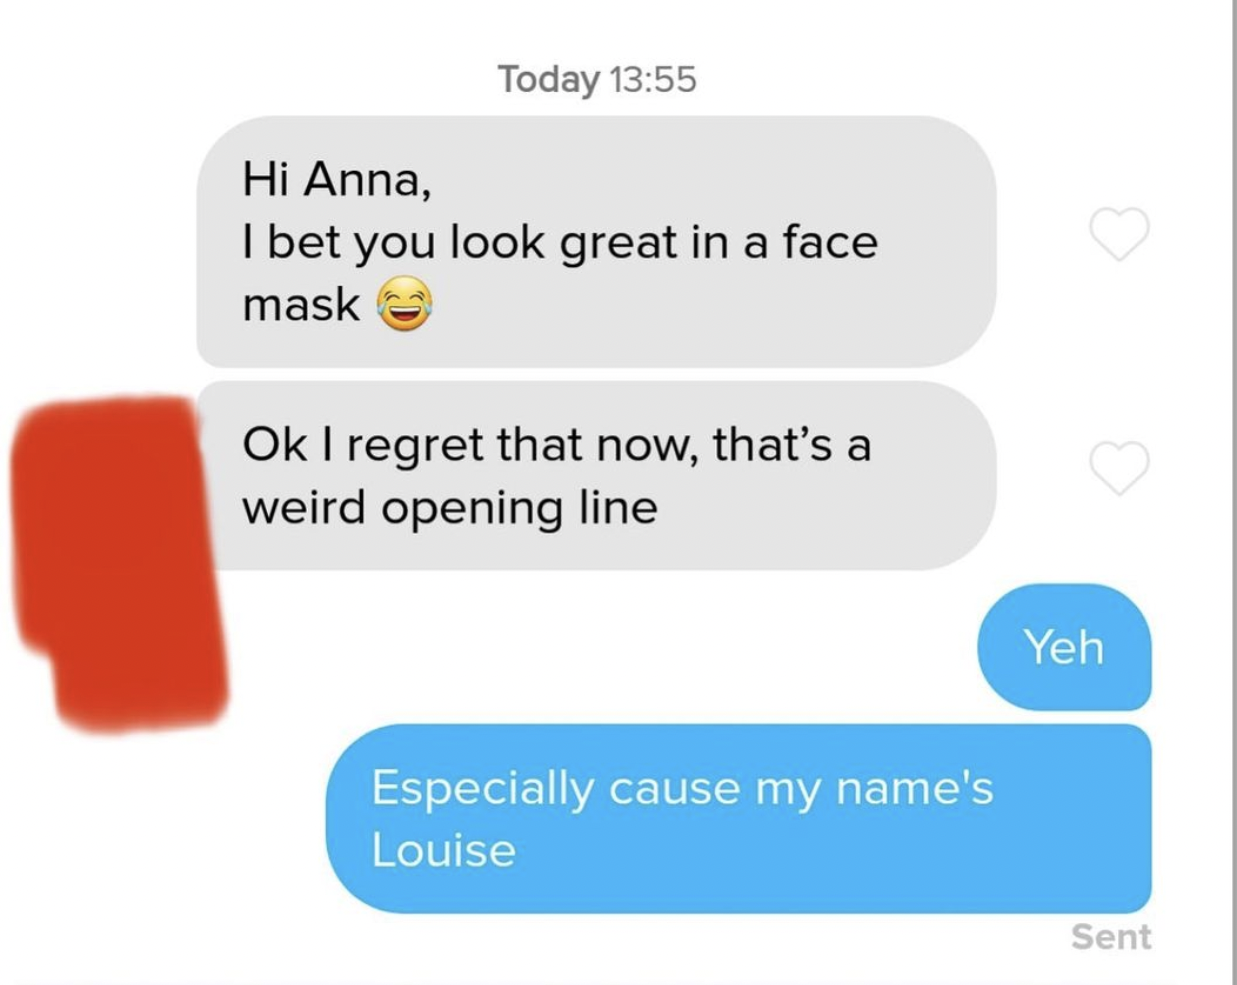 cringe tinder openers - communication - Today Hi Anna, I bet you look great in a face mask Ok I regret that now, that's a weird opening line Especially cause my name's Louise Yeh Sent